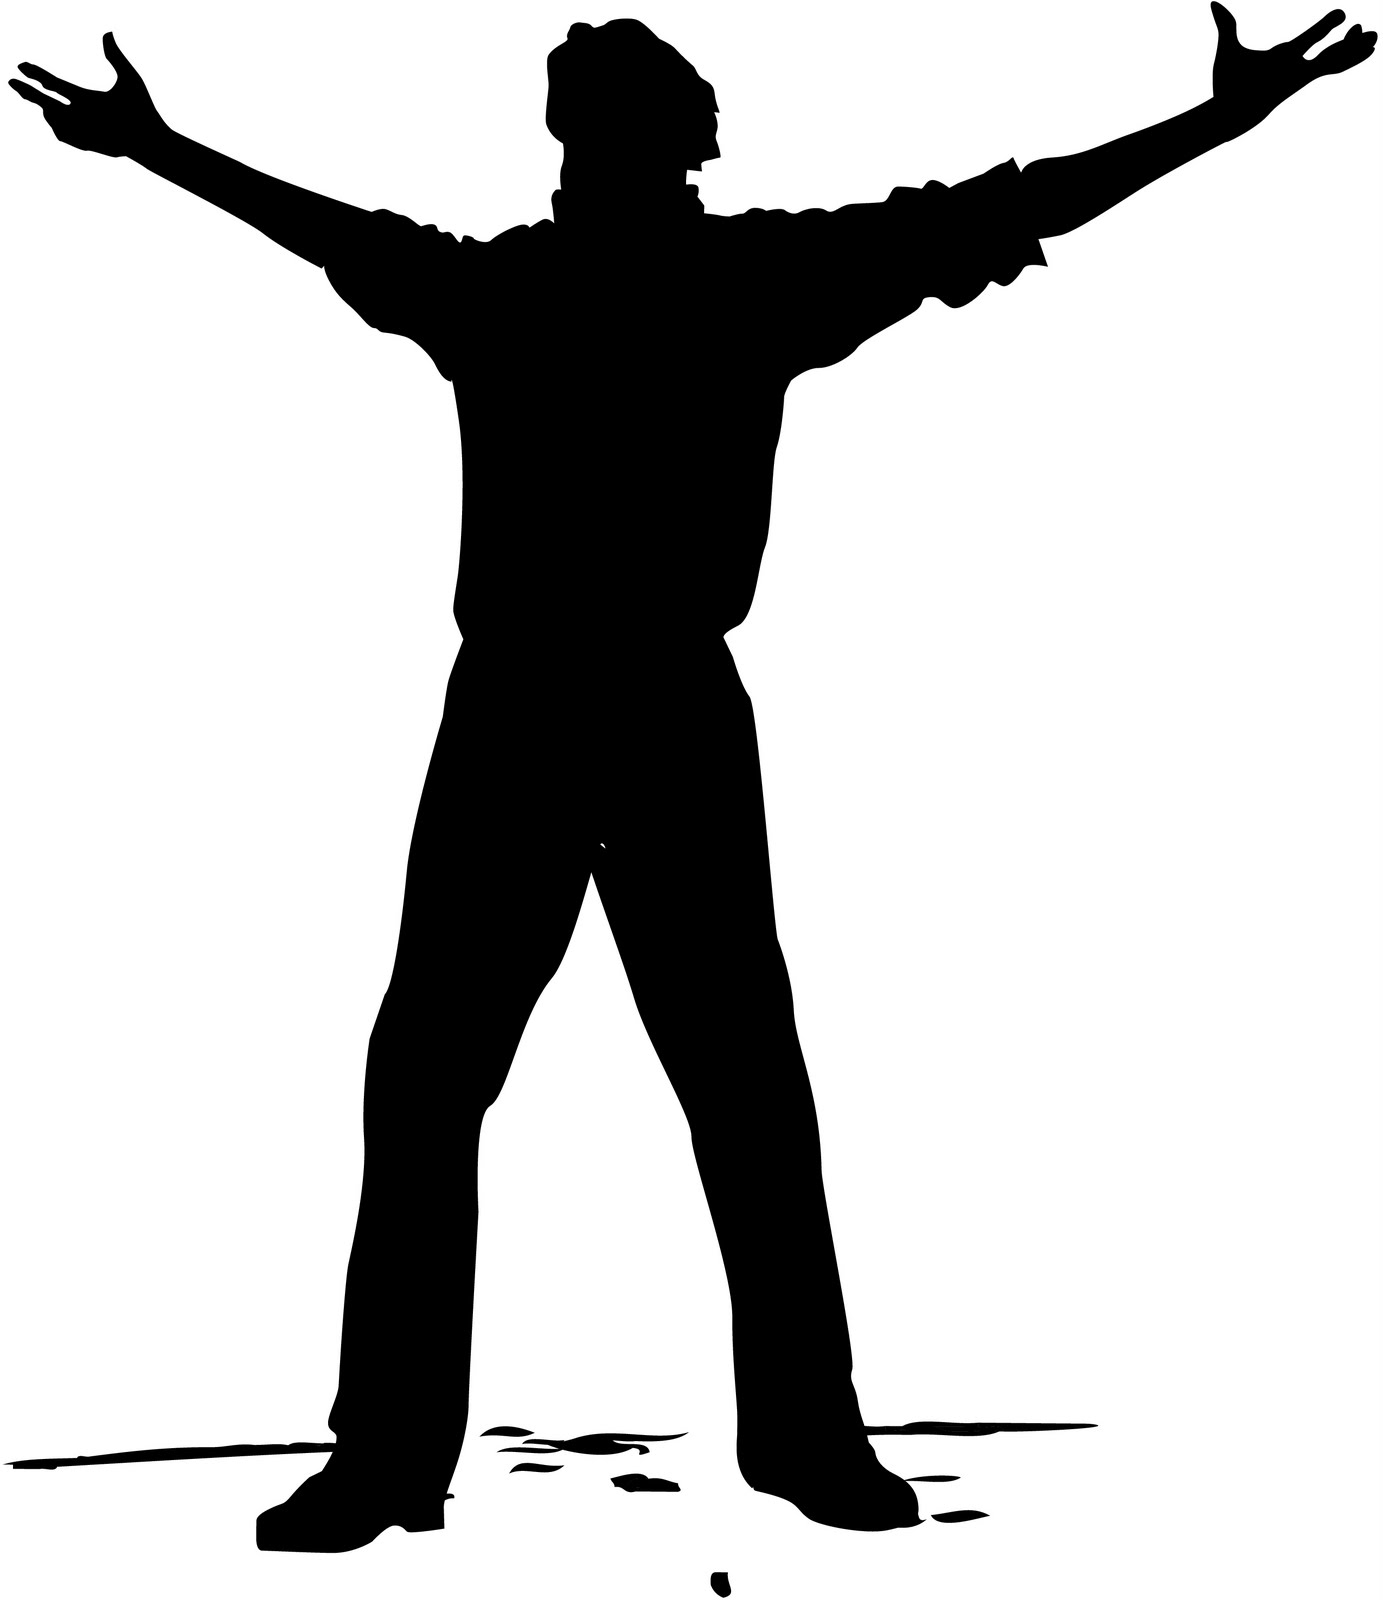 Free Man Reaching Out Silhouette, Download Free Clip Art